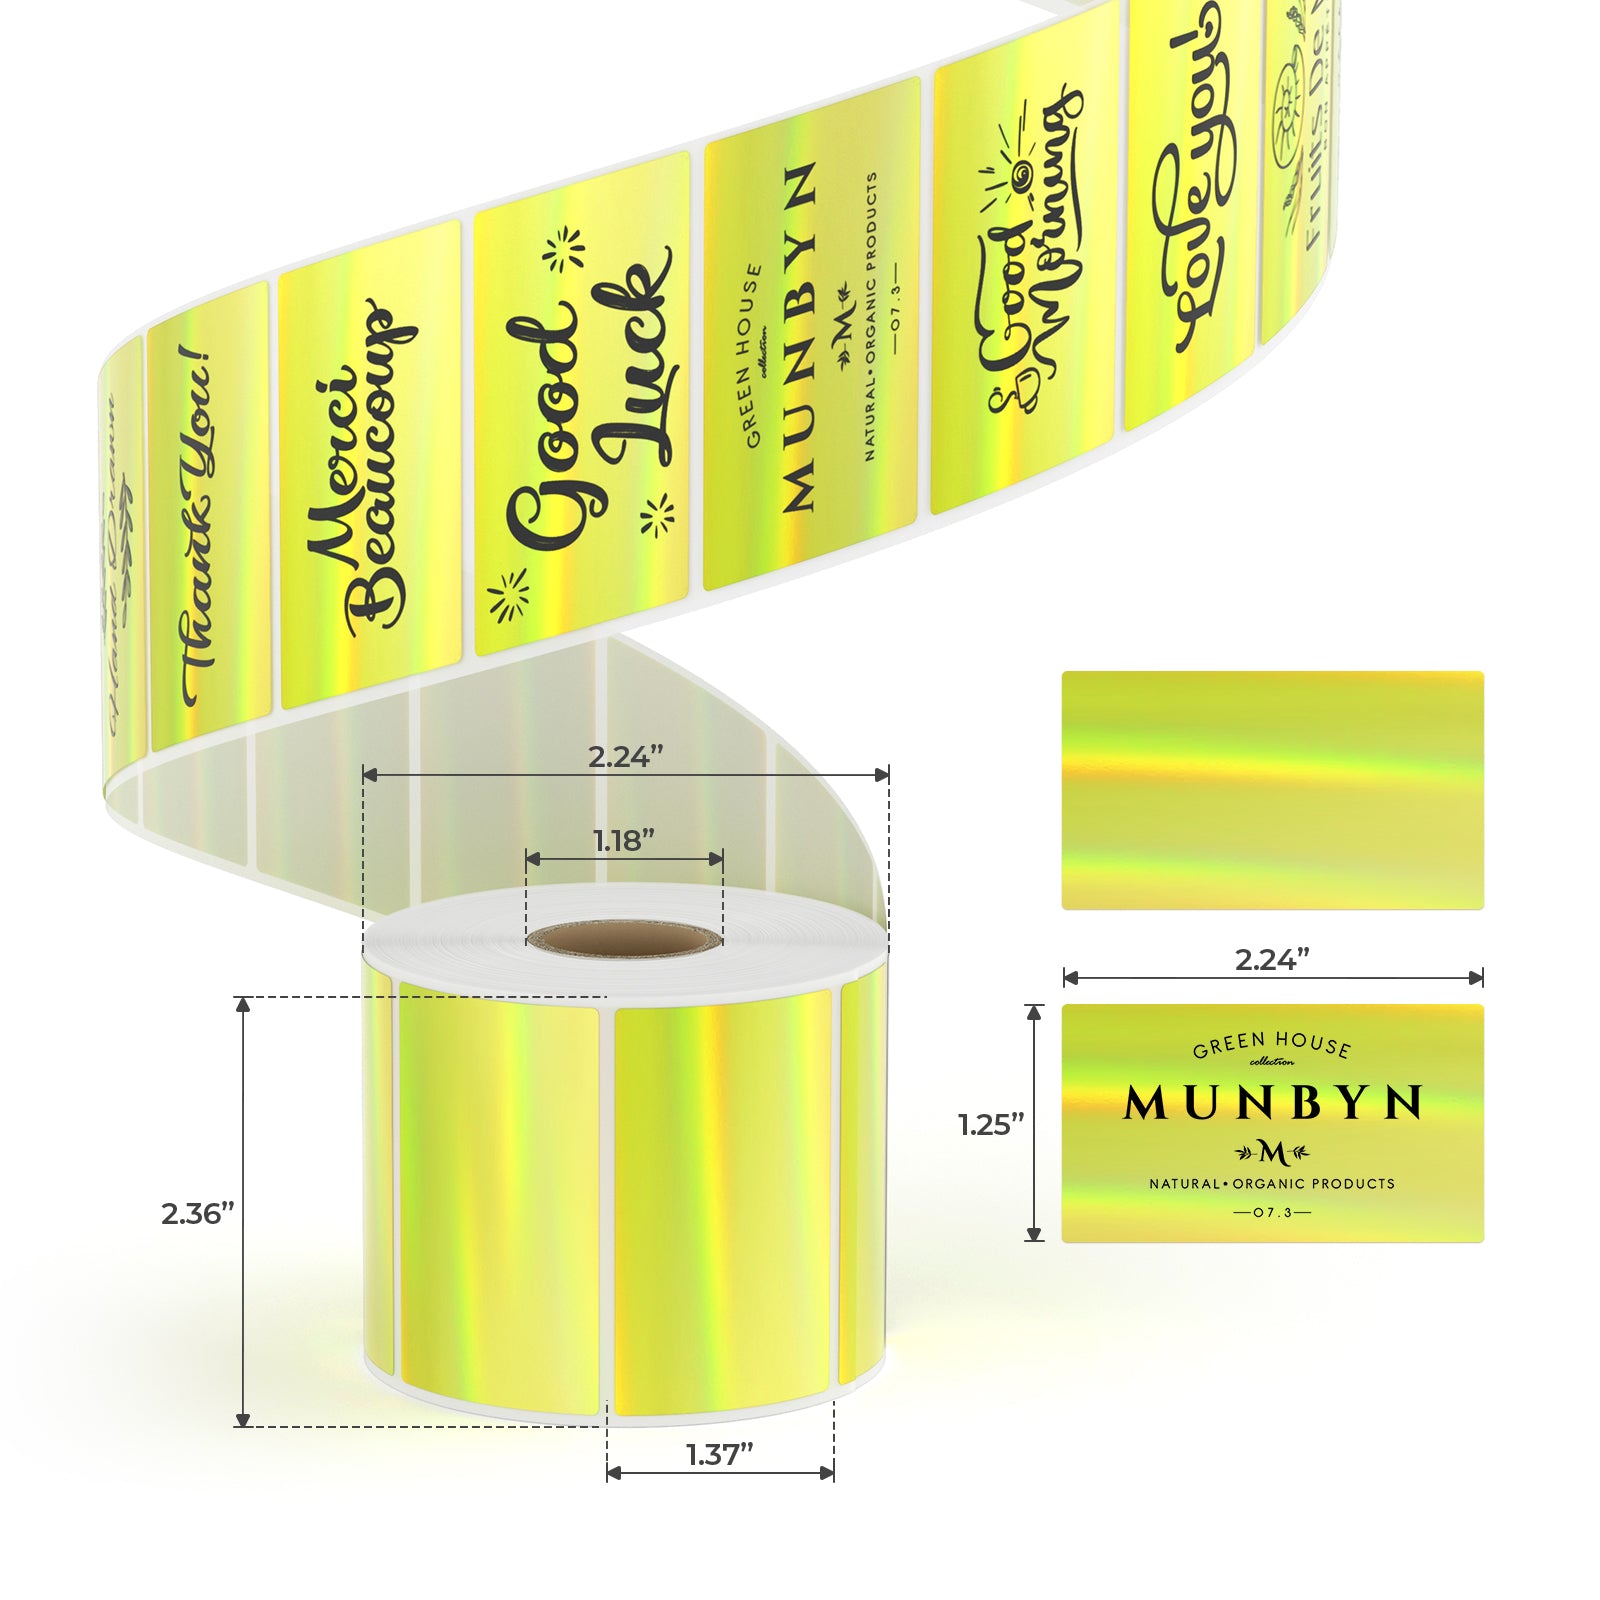 MUNBYN's versatile gold holographic rectangle thermal labels measure 1.25"x2.24", with 250 labels per roll.